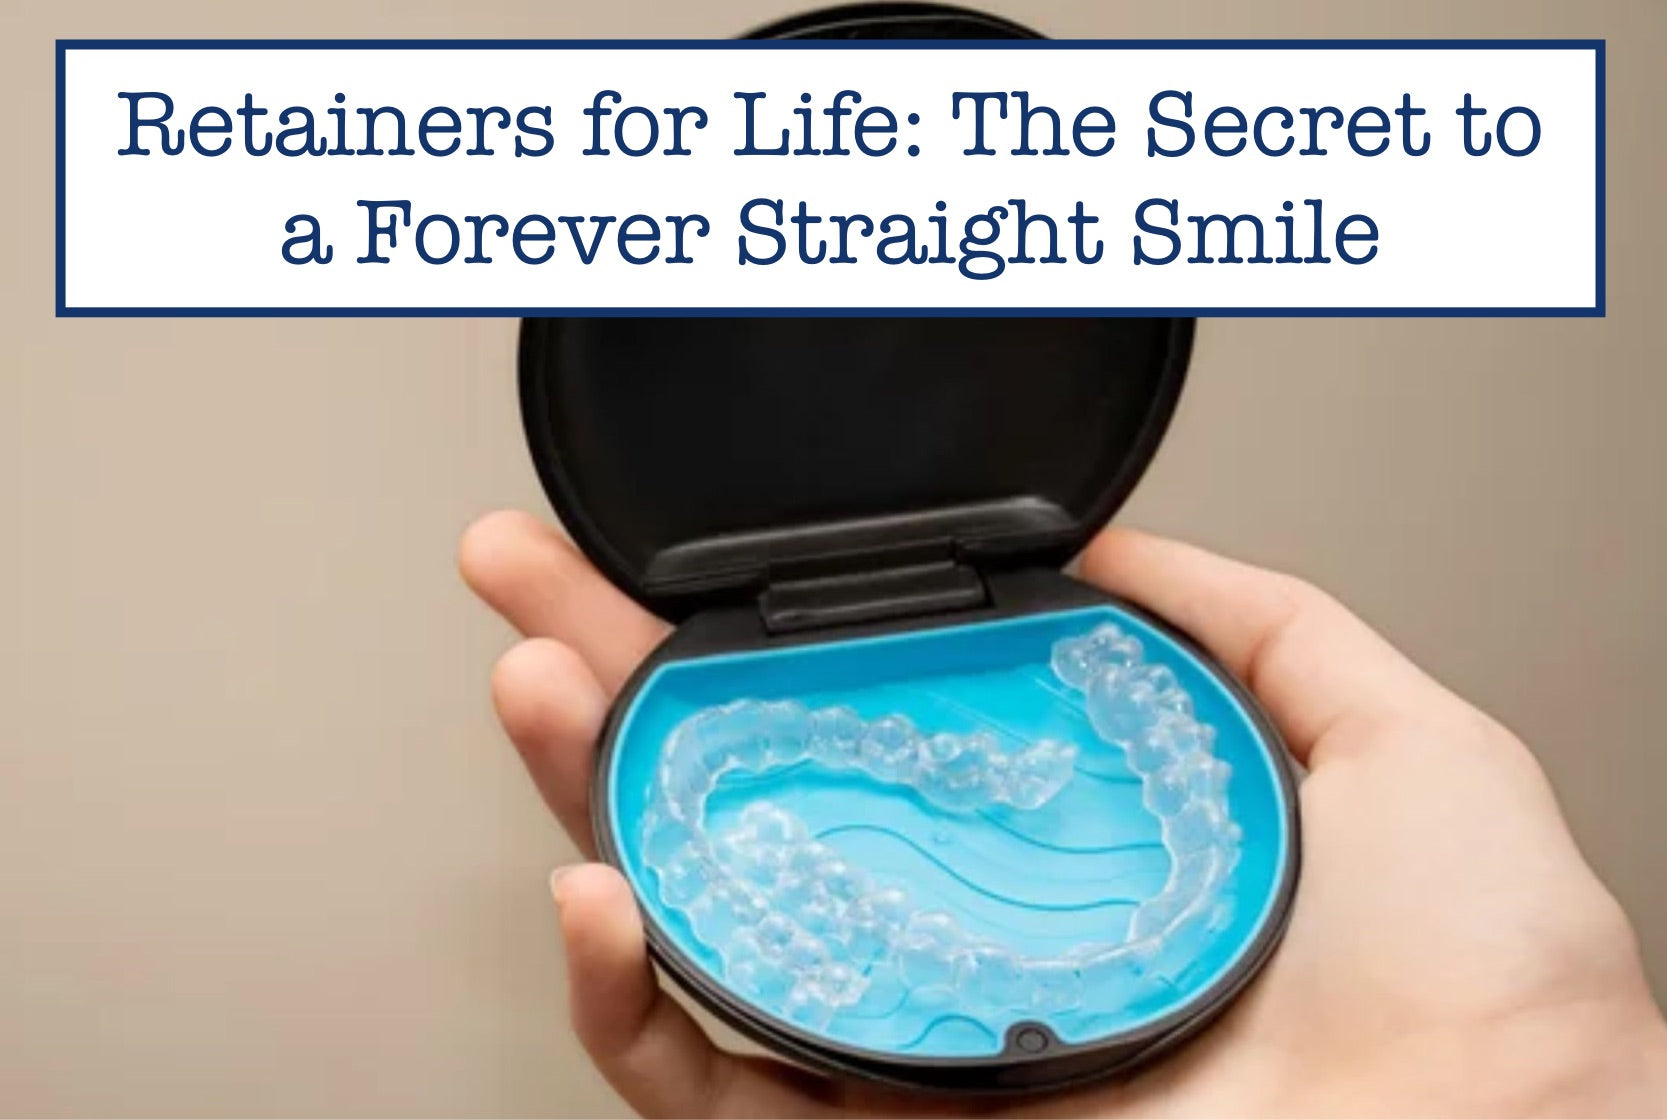 Retainers for Life: The Secret to a Forever Straight Smile